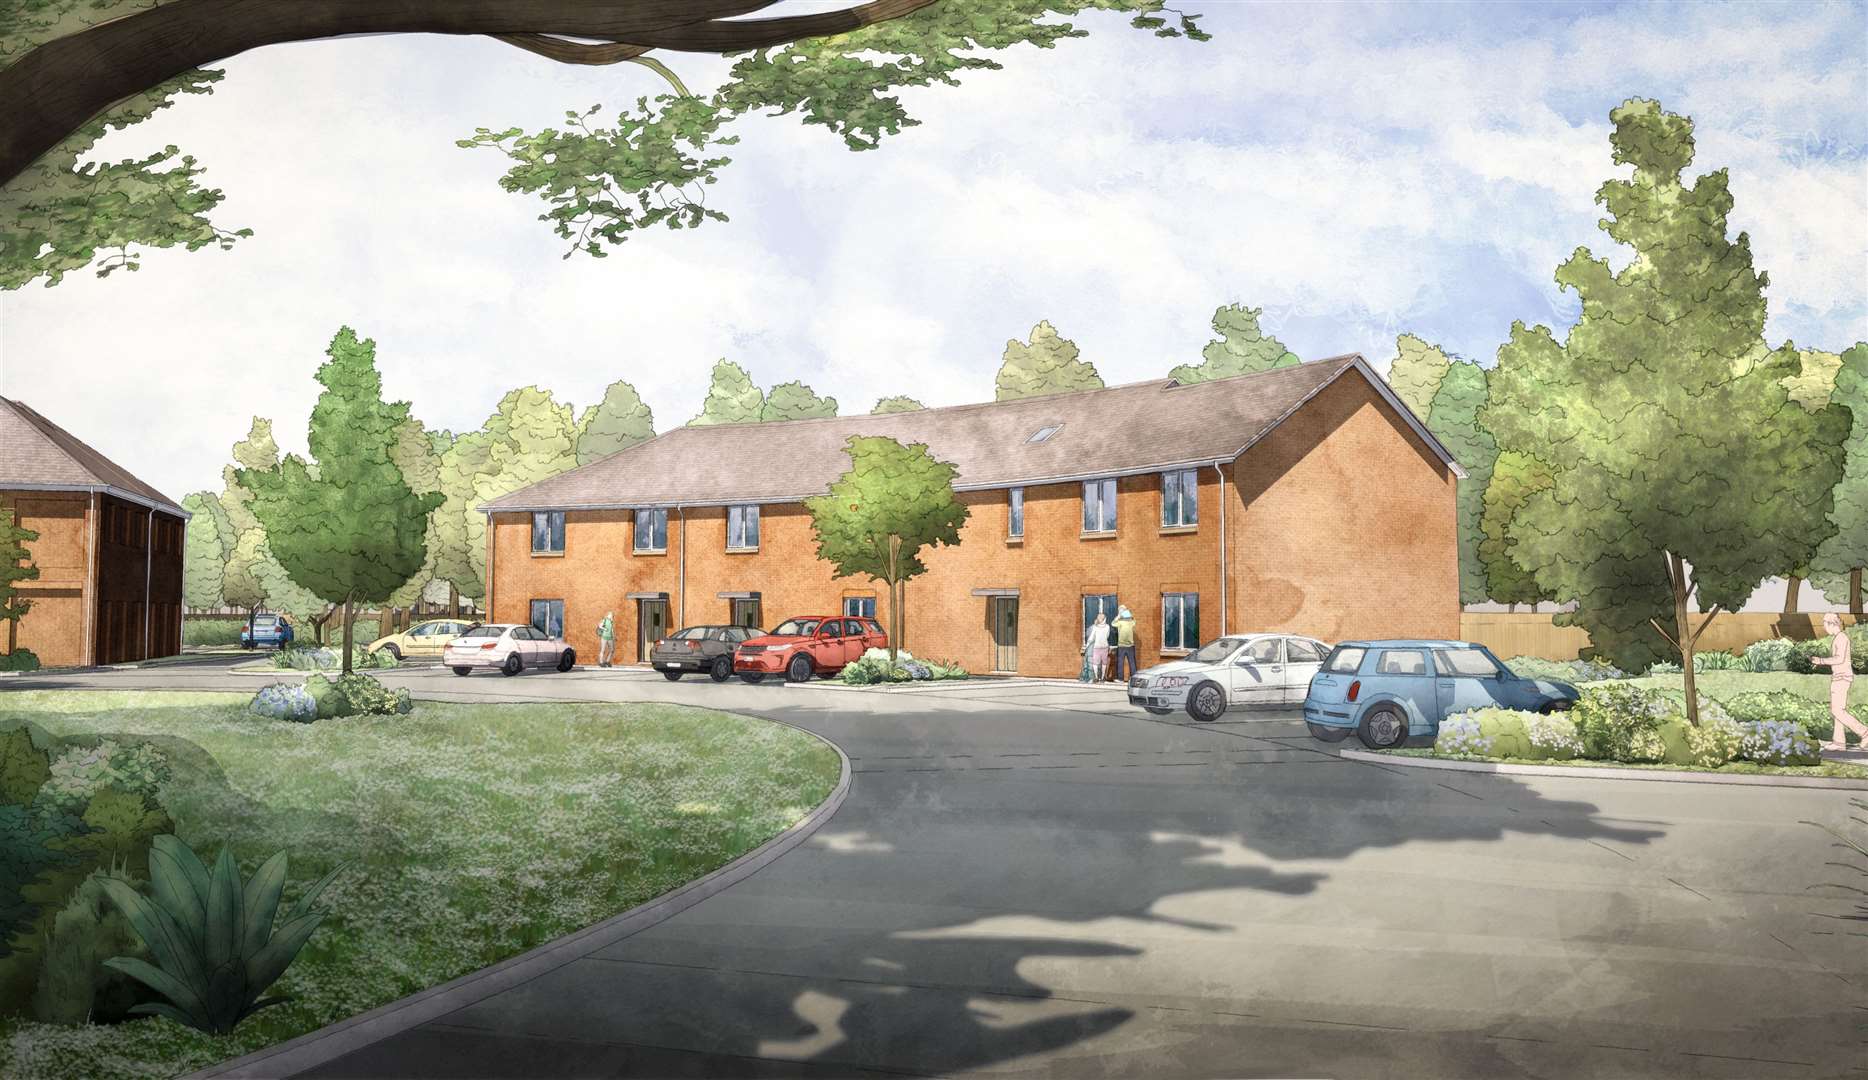 An artist's impression of how the new homes will look at the RBLI Centenary Village in Aylesford